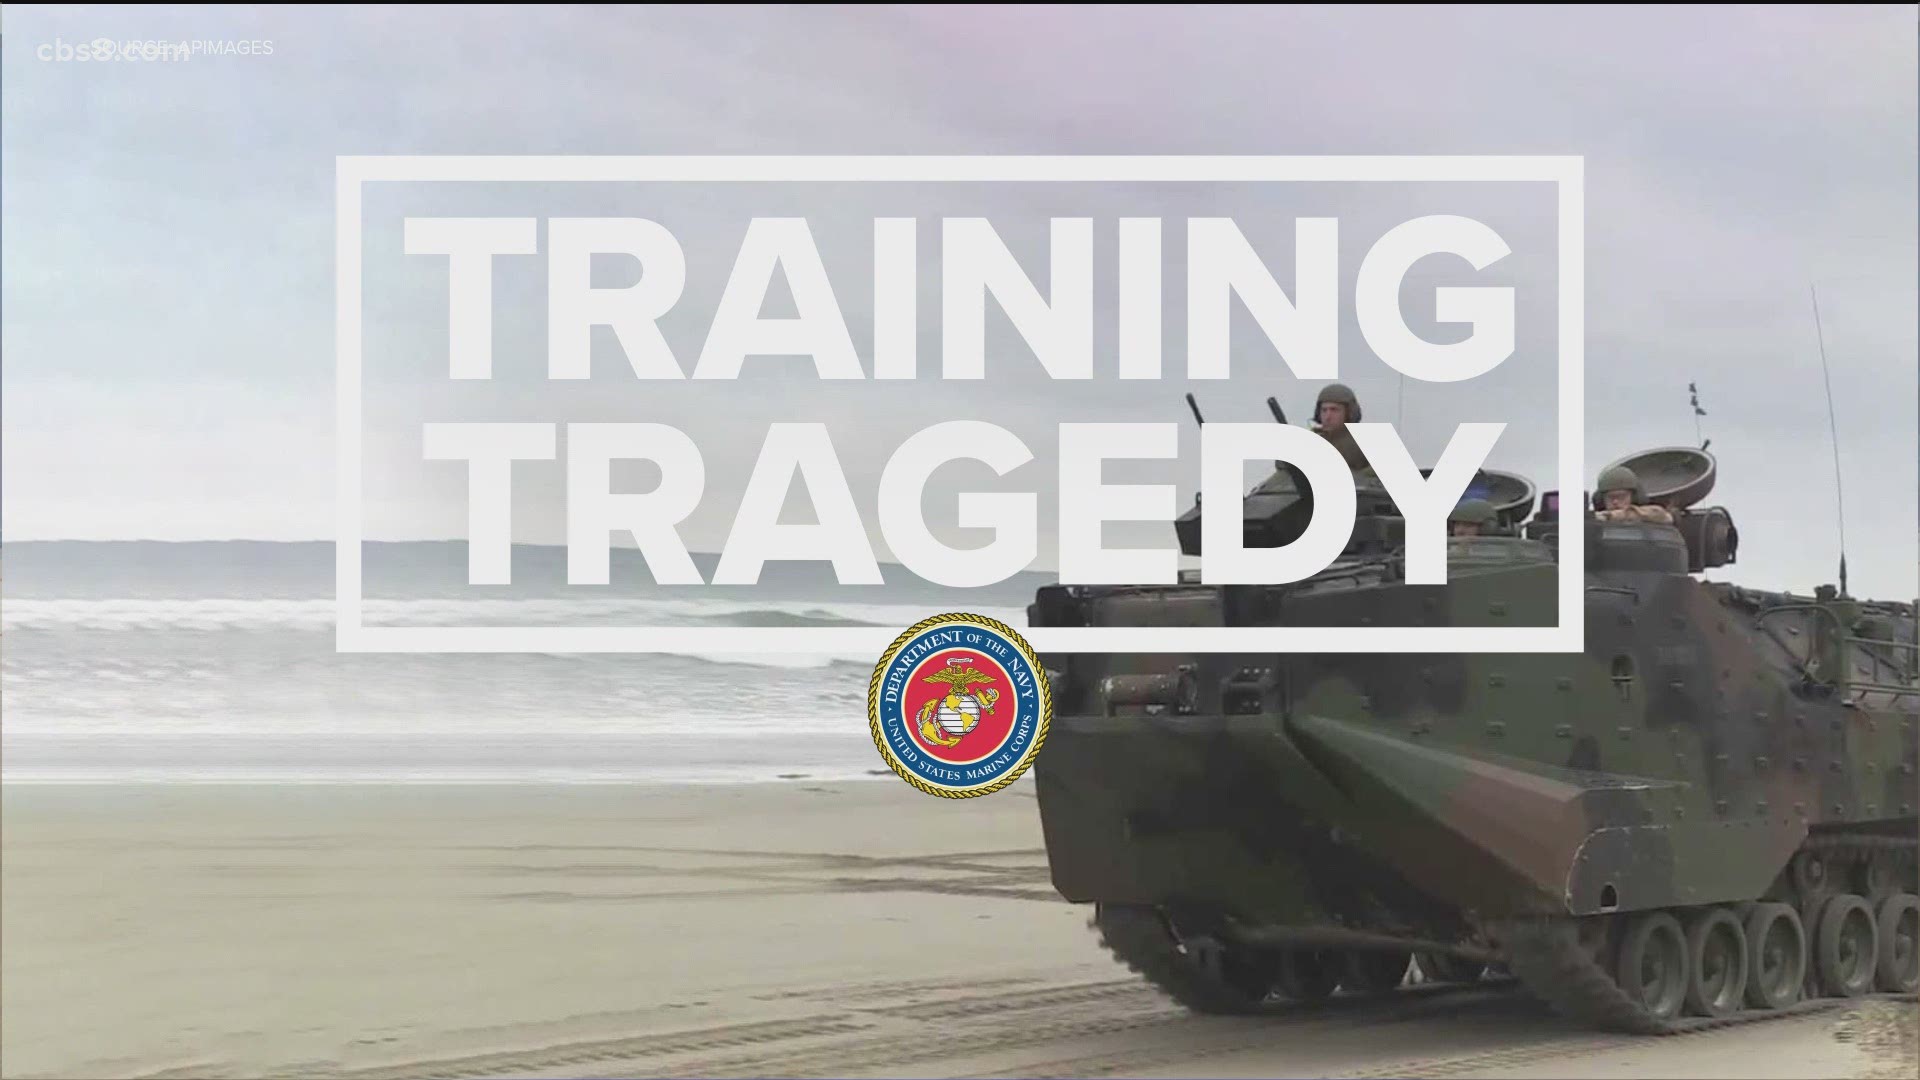 The tank-like amphibious assault vehicle took on water and sank hundreds of feet Thursday off San Clemente Island after a training exercise.